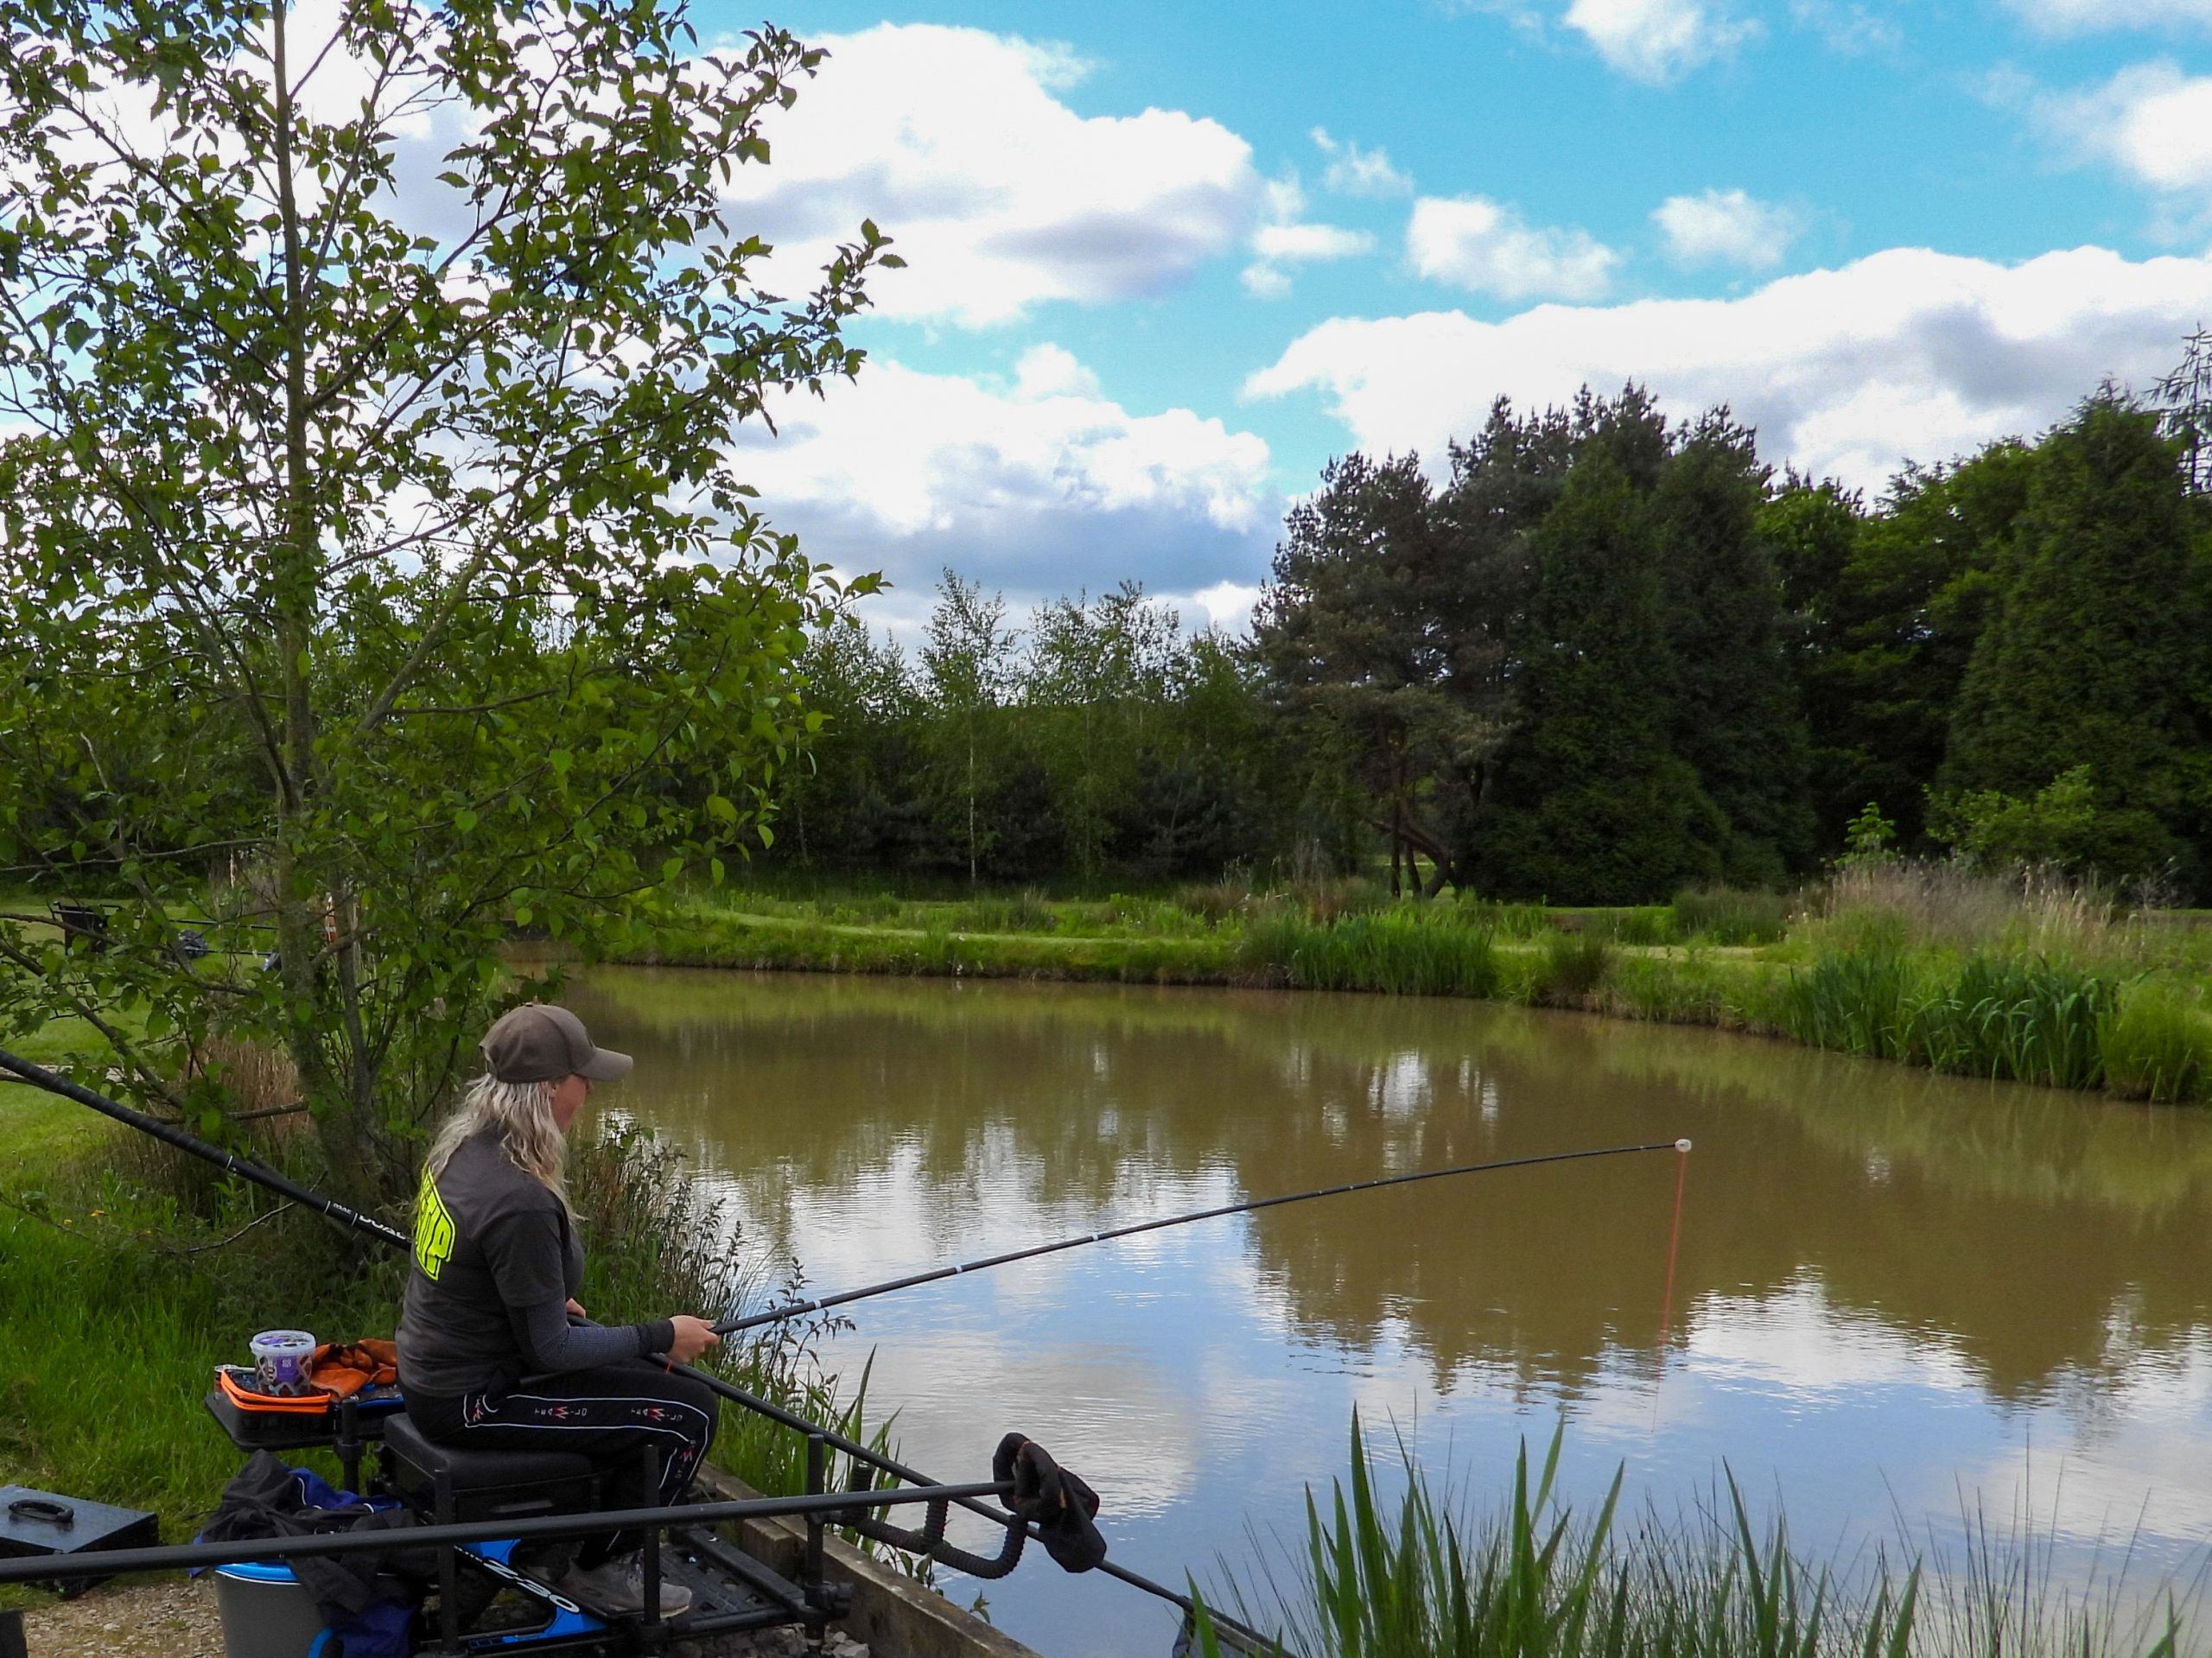 Get Fishing - Emma Harrison Fishing at a commercial fishery